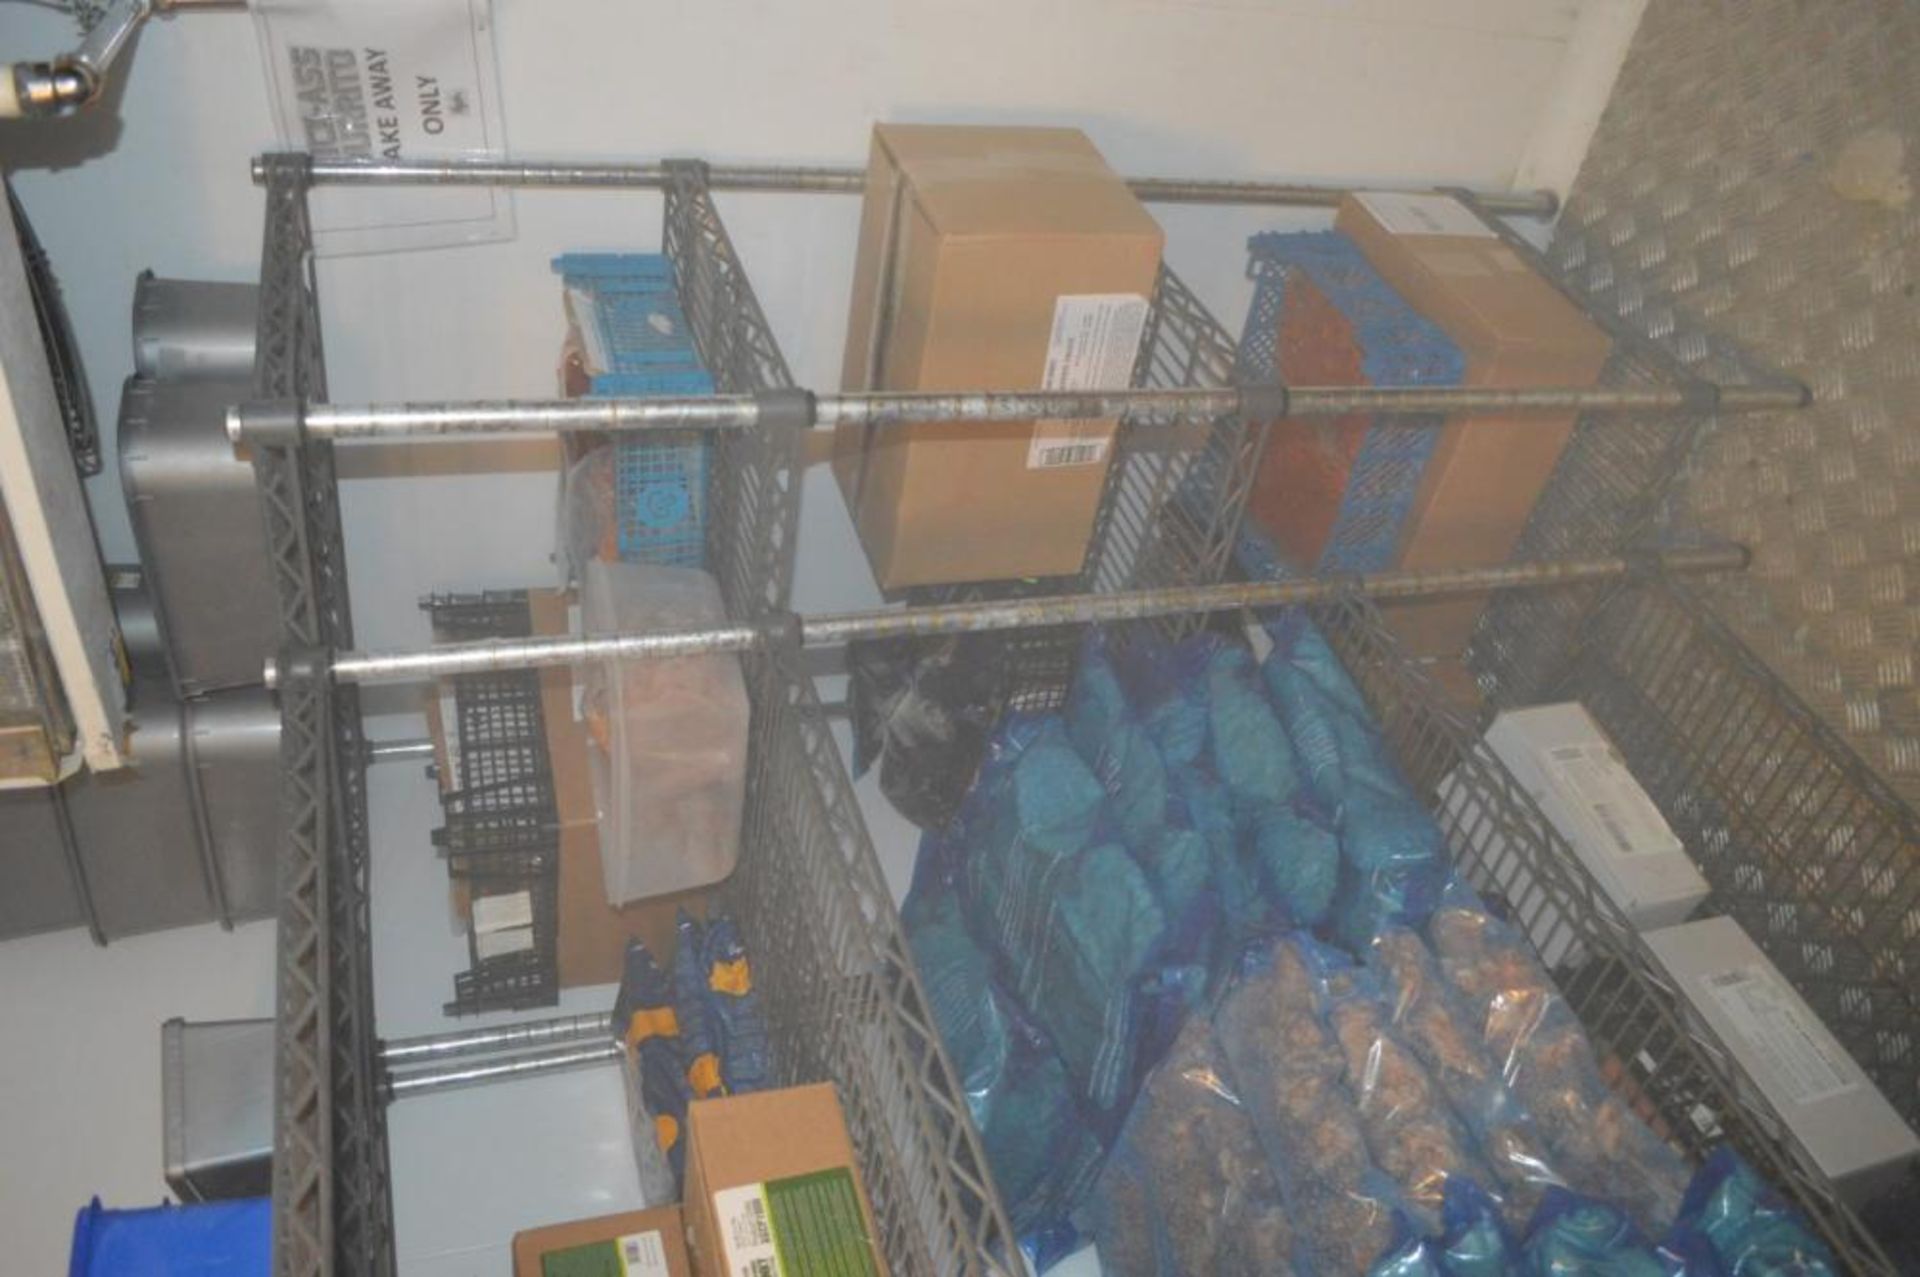 6 x Assorted Freezer Room Wire Storage Shelves - Assorted Widths of Approx 90 to 120 cms With an App - Image 5 of 6